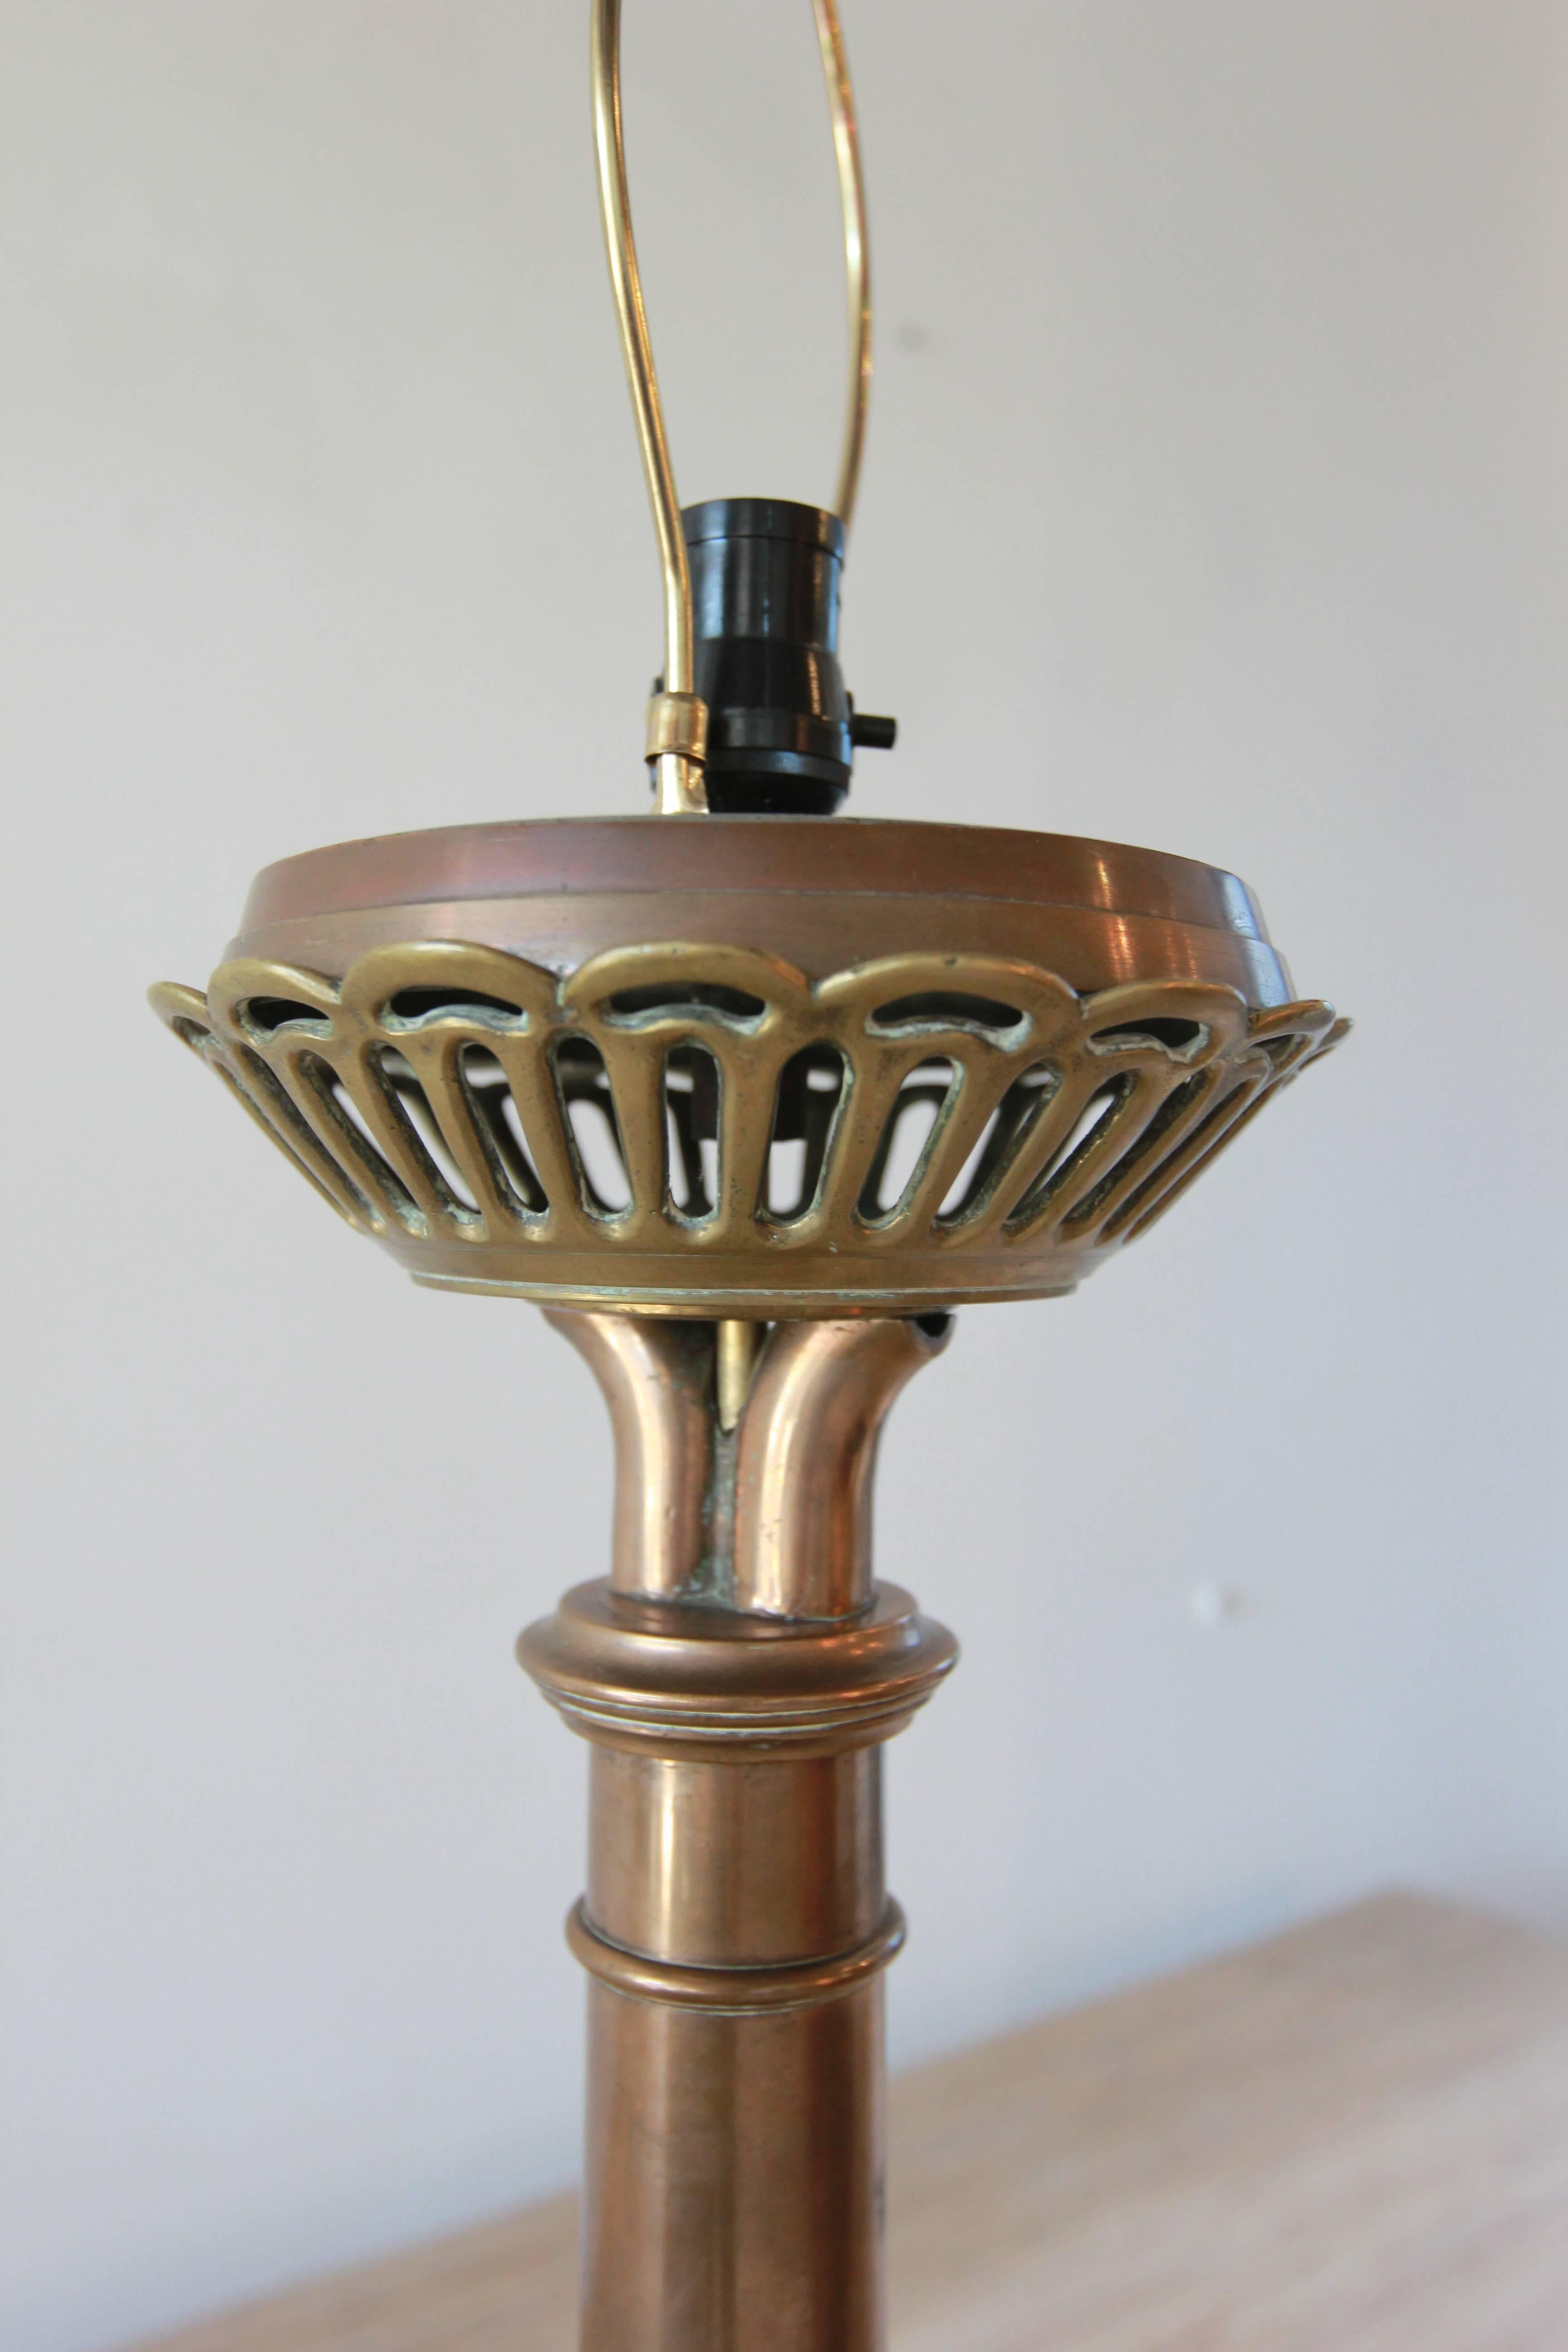 Heavy solid square brass lamp.